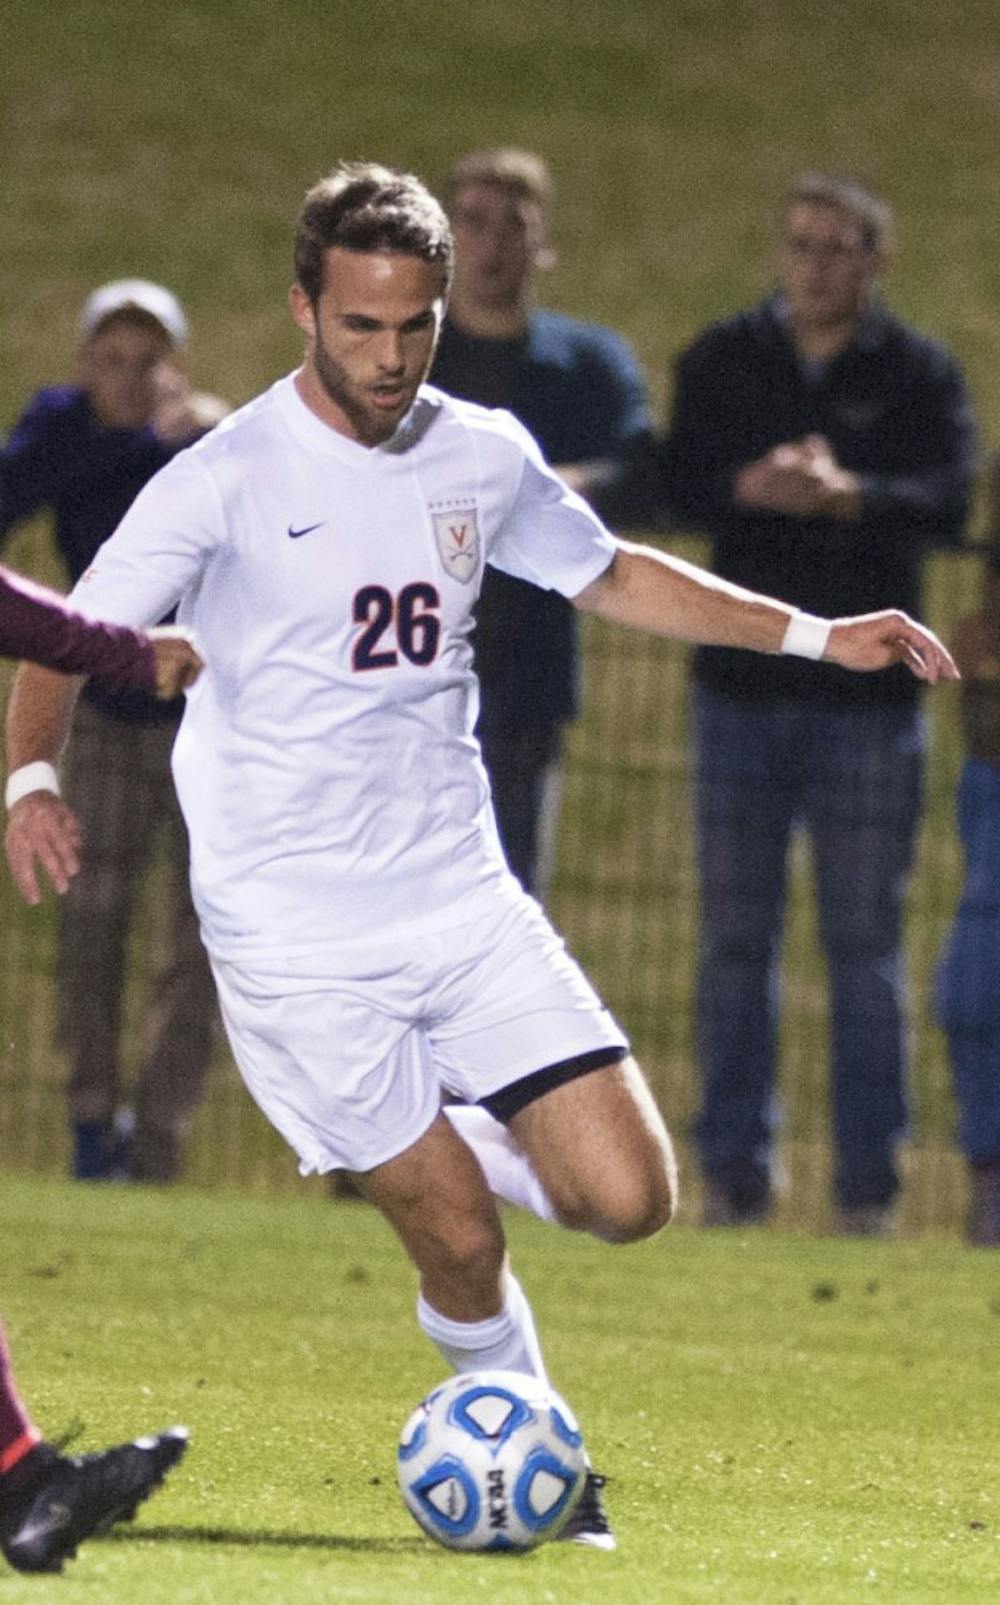 <p>Sophomore forward Sam Hayward scored the equalizer in the 44th minute, helping Virginia overcome an early injury to standout senior midfielder  Eric Bird. </p>